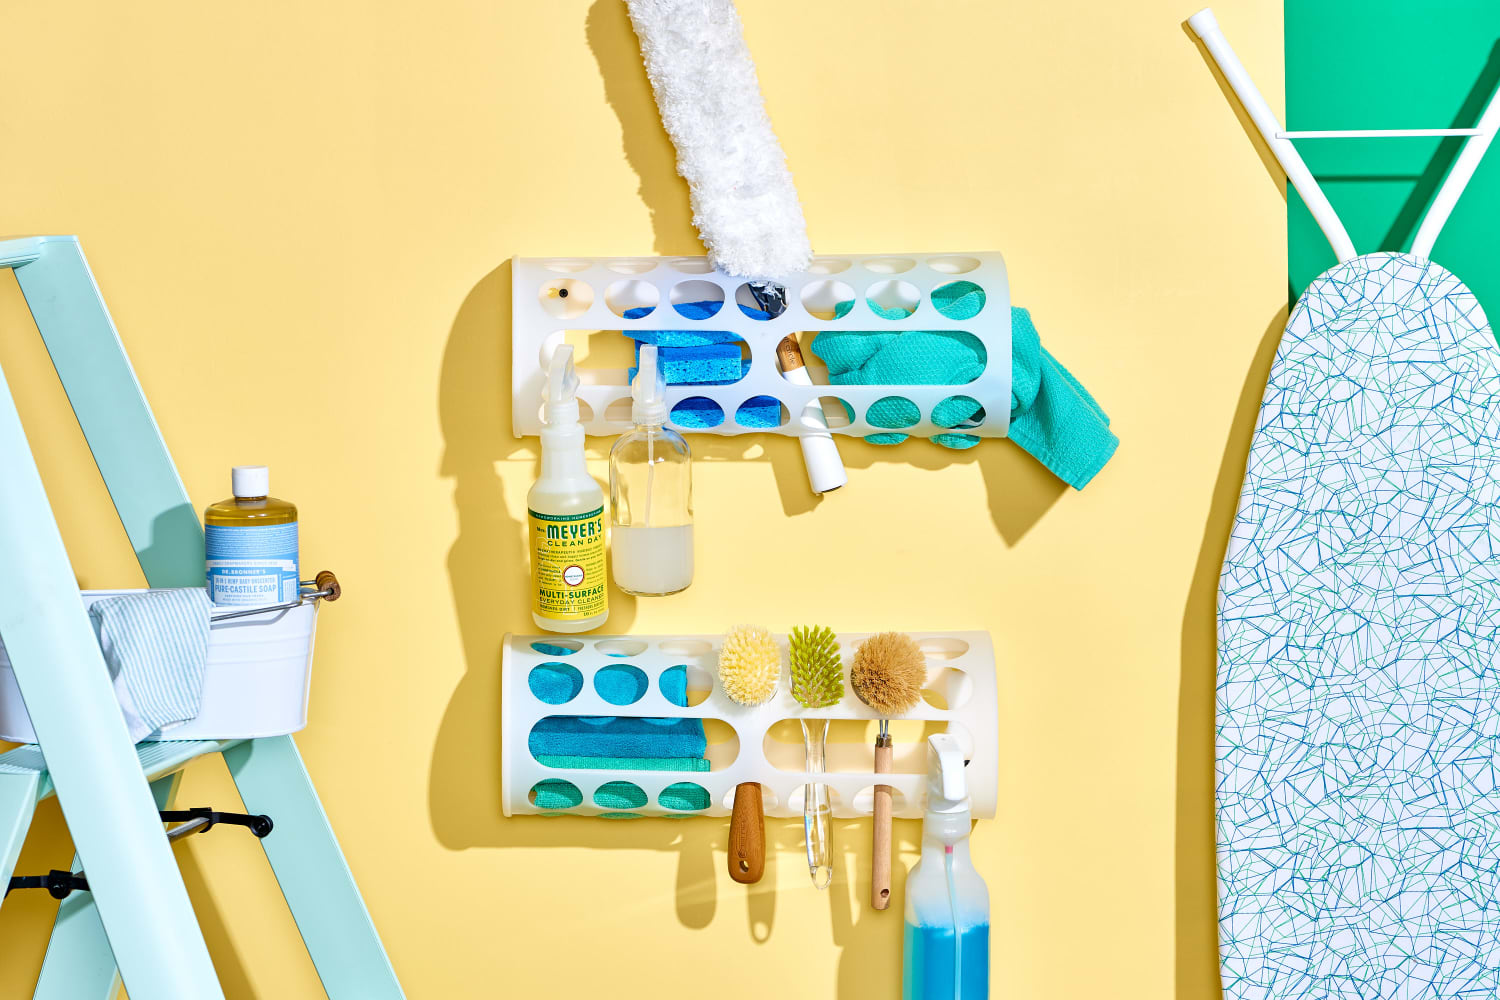 Organising Your Cleaning Supplies, by Justlife